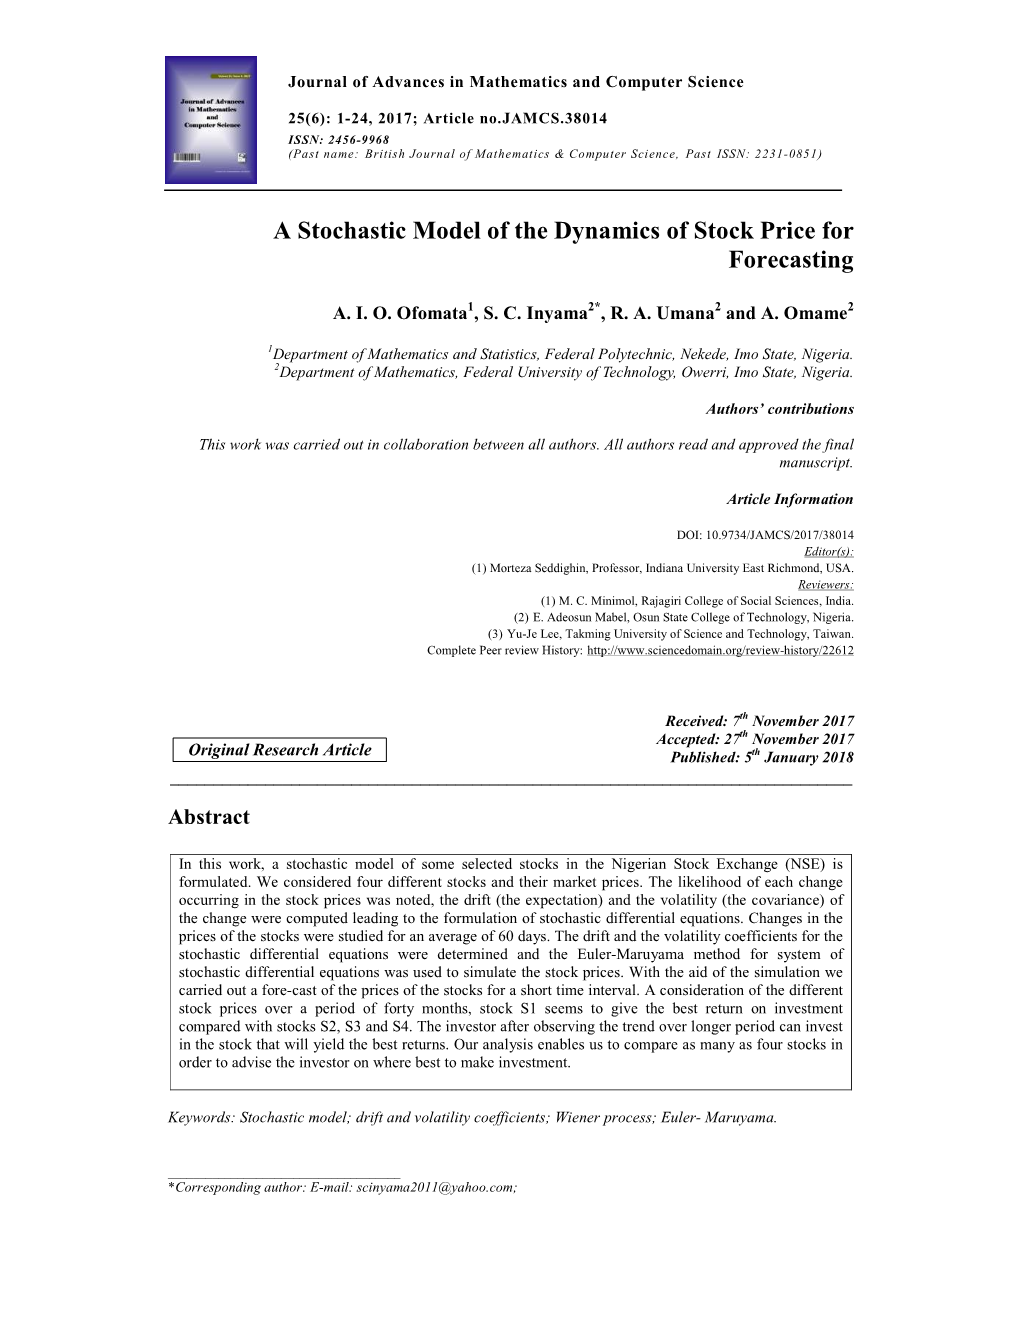 A Stochastic Model of the Dynamics of Stock Price for Forecasting